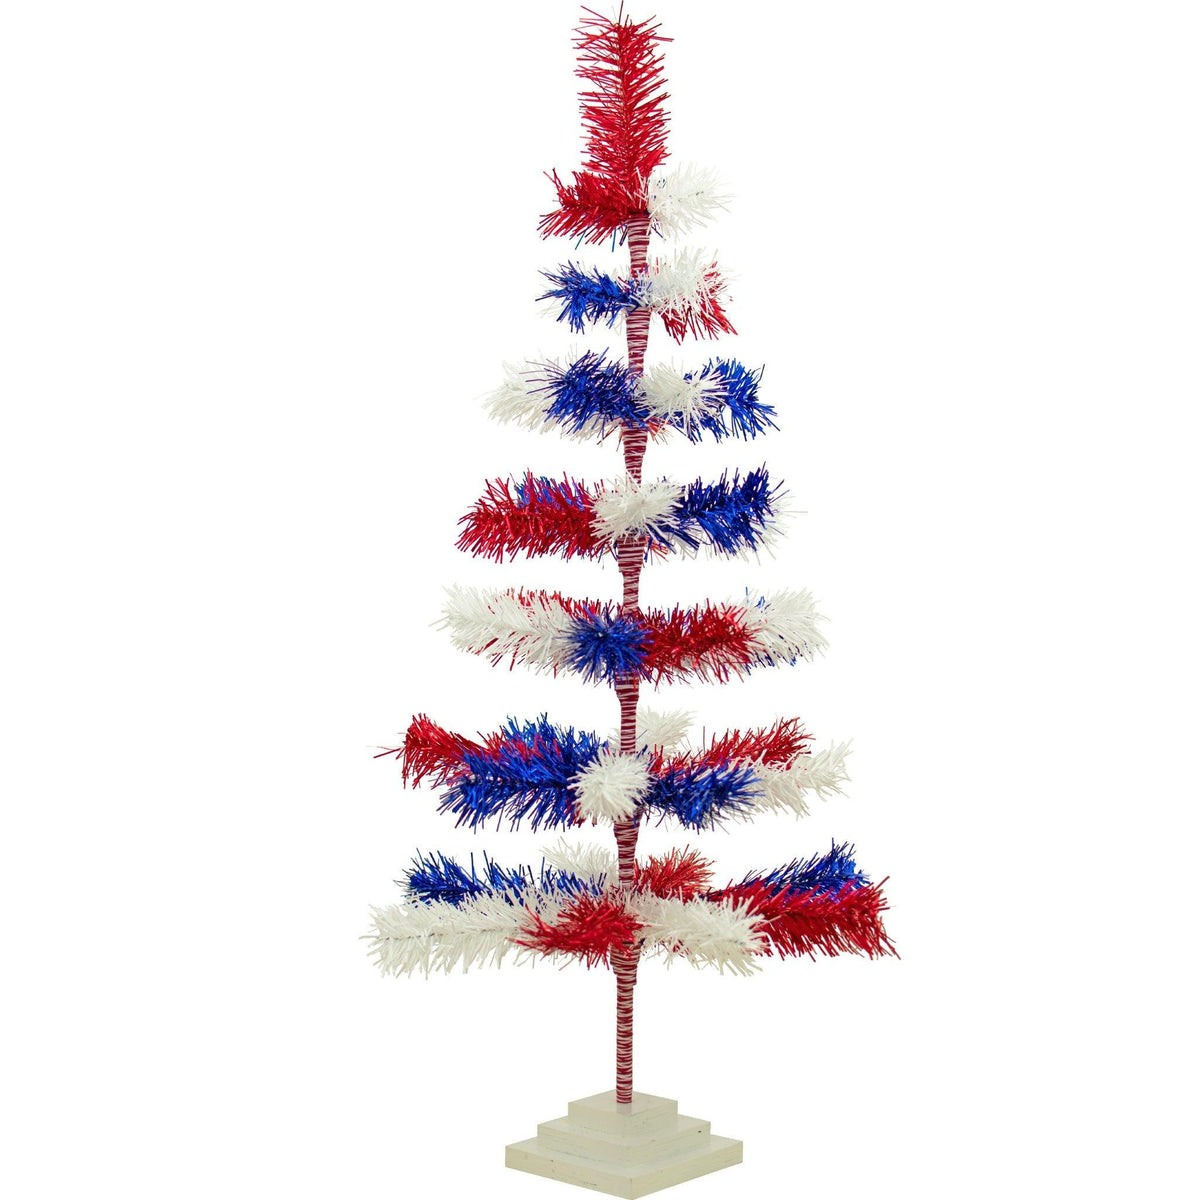 36in Tall Red White and Blue Mixed Tinsel Christmas Tree on sale at leedisplay.com.